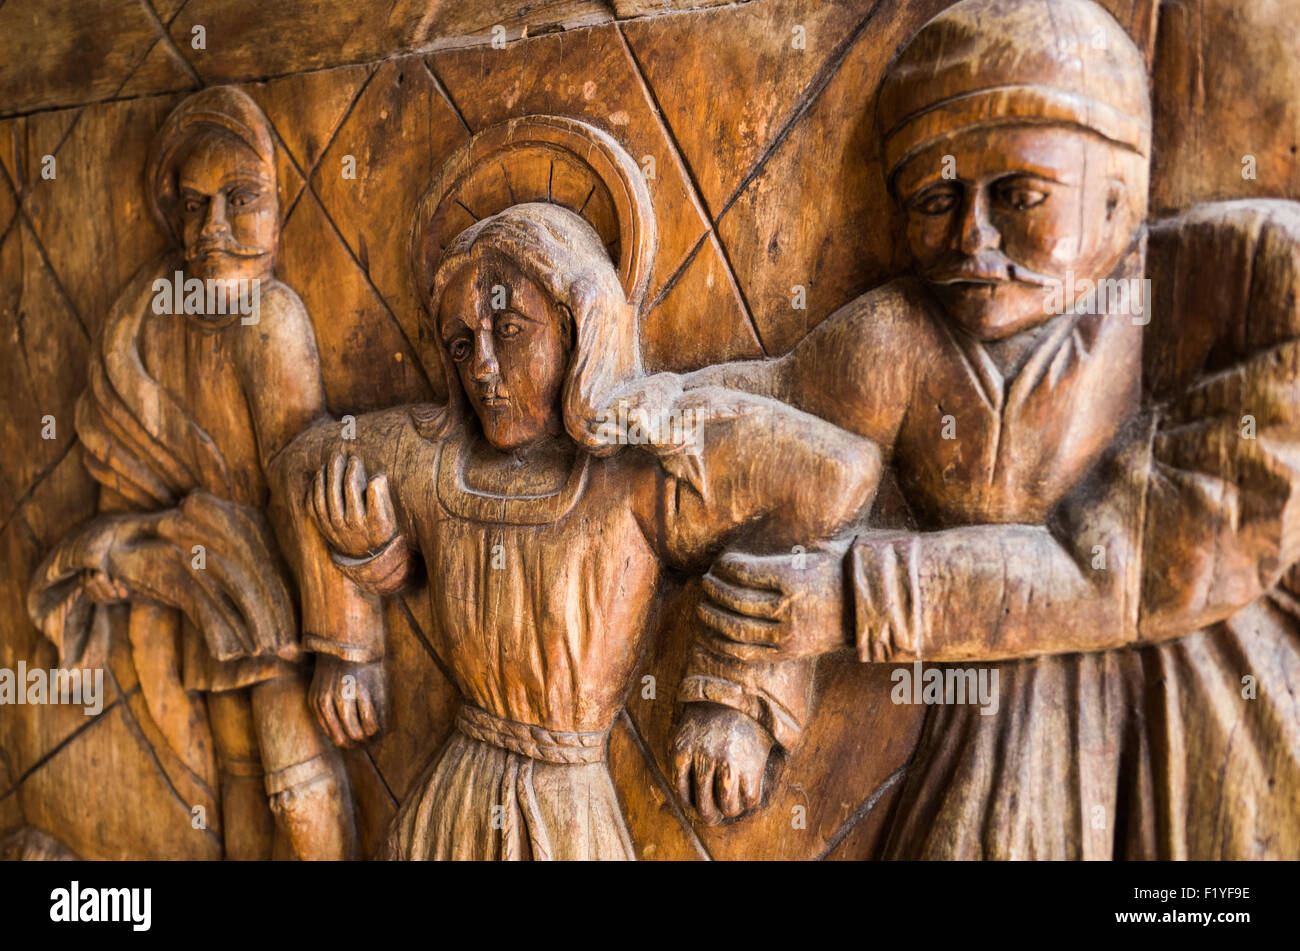 Part of the heavy carved wooden doors at the the Iglesia de Santa Ines (Church of Saint Agnes) in the historic Centro Historico district of downtown Mexico City, Mexico. Stock Photo